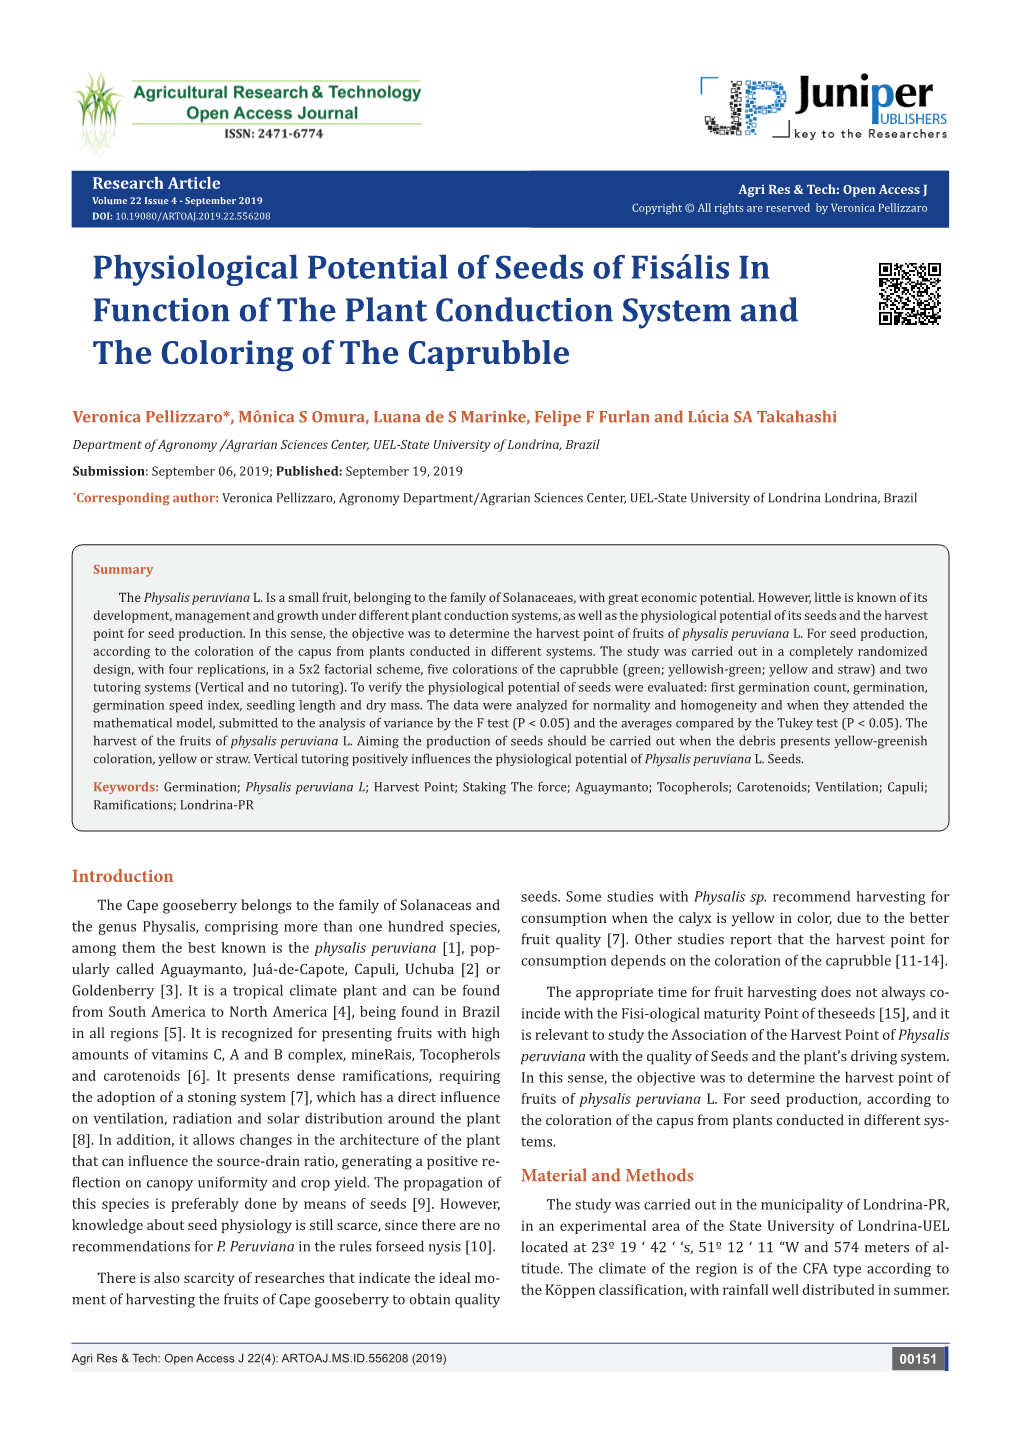 Physiological Potential of Seeds of Fisális in Function of the Plant Conduction System and the Coloring of the Caprubble